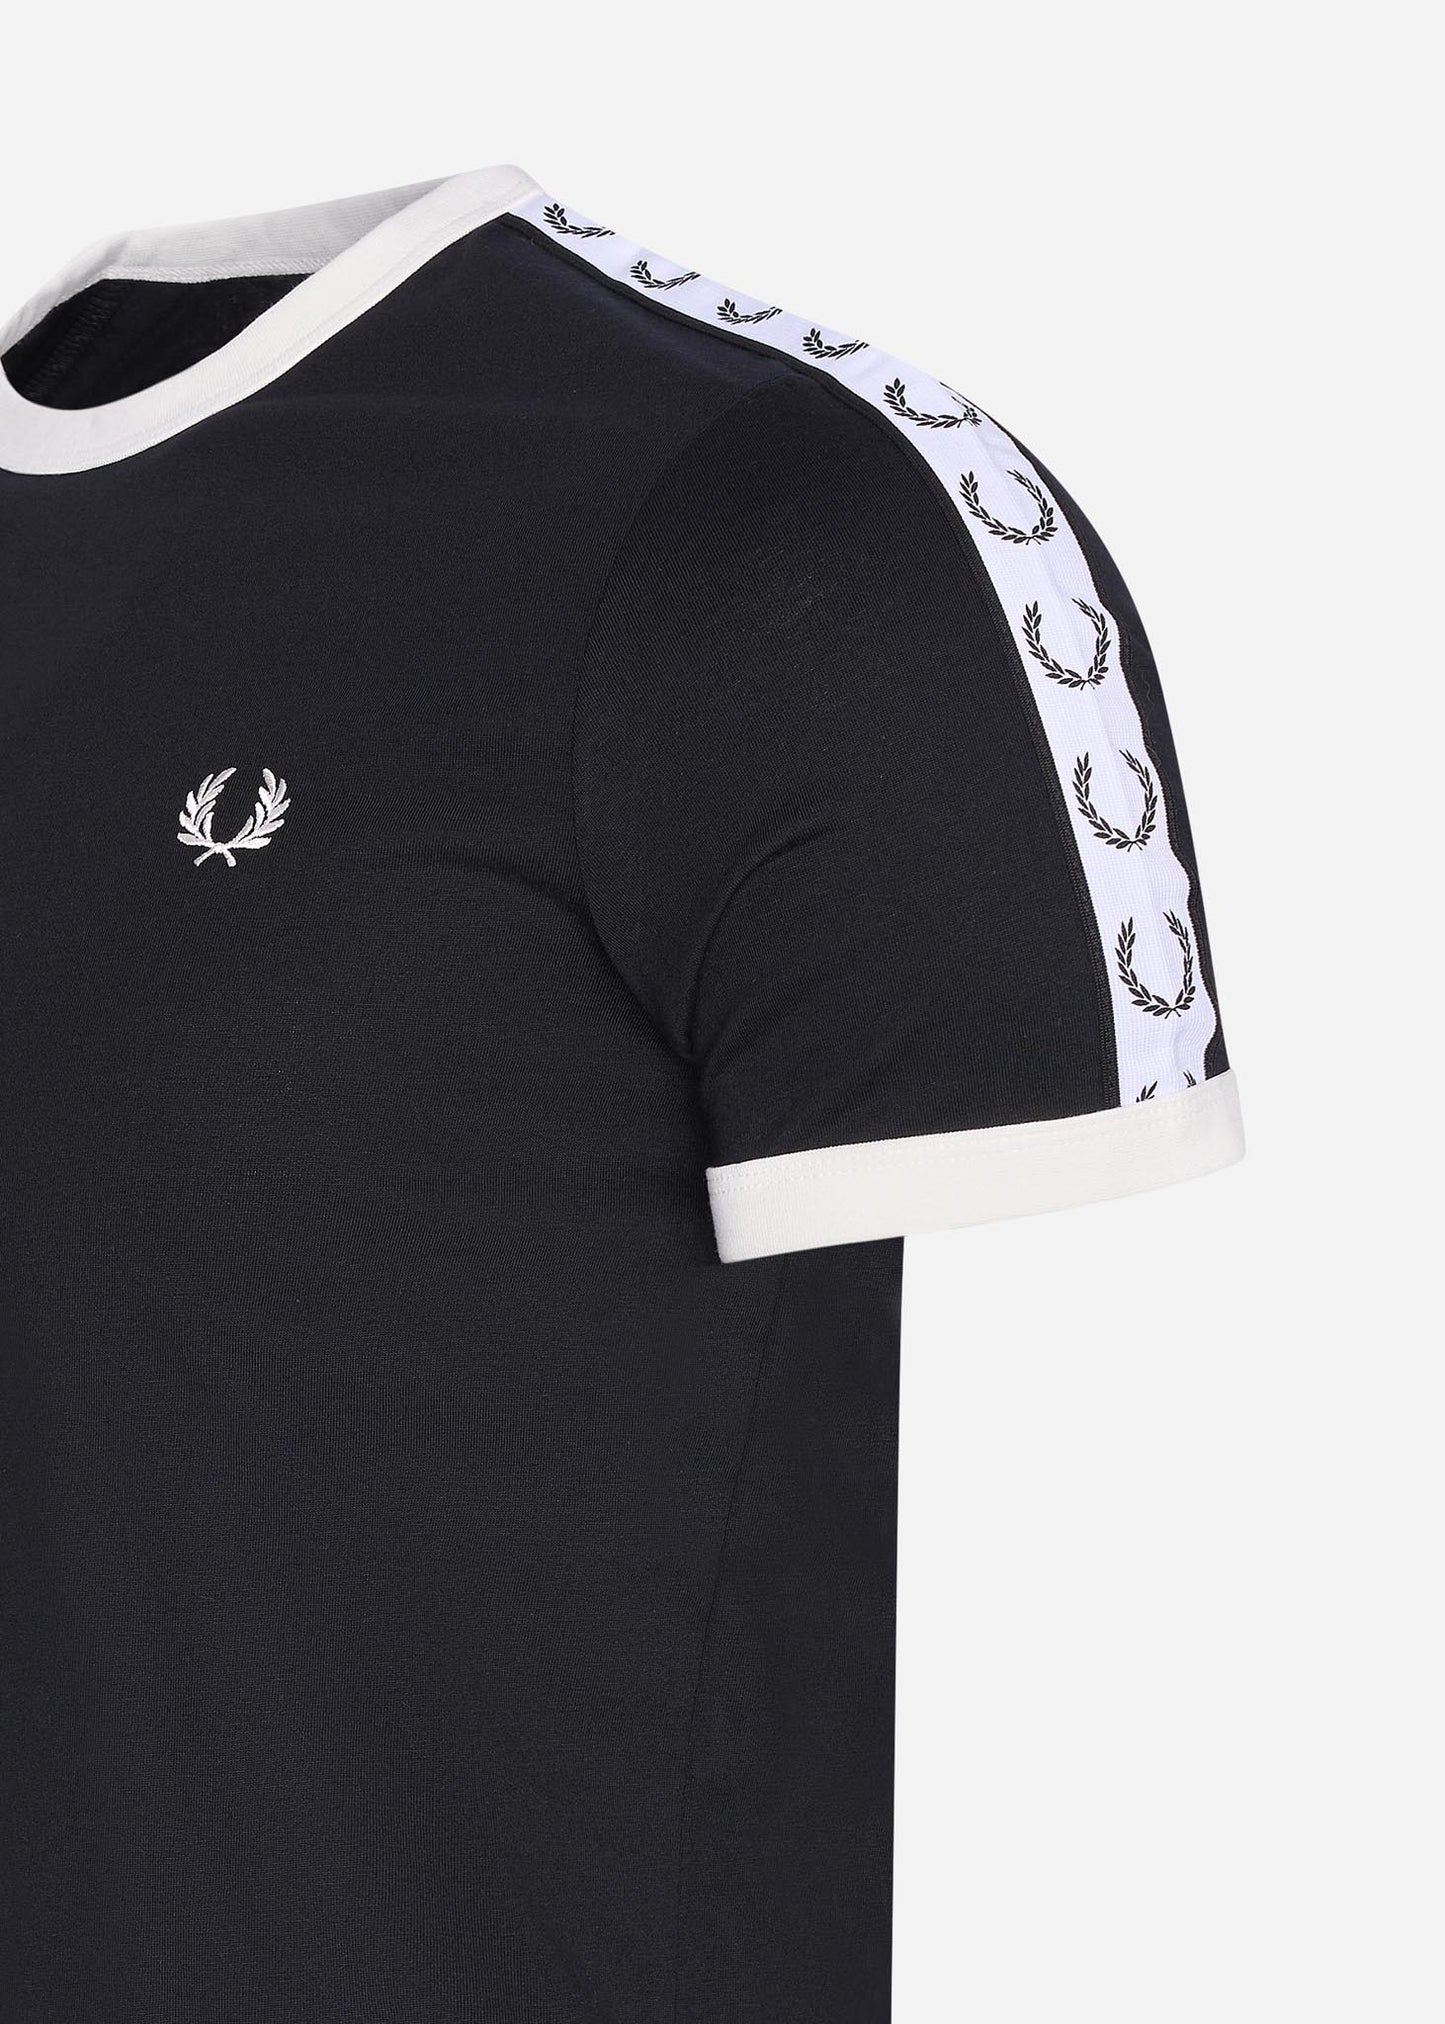 Fred Perry taped ringer t-shirt black